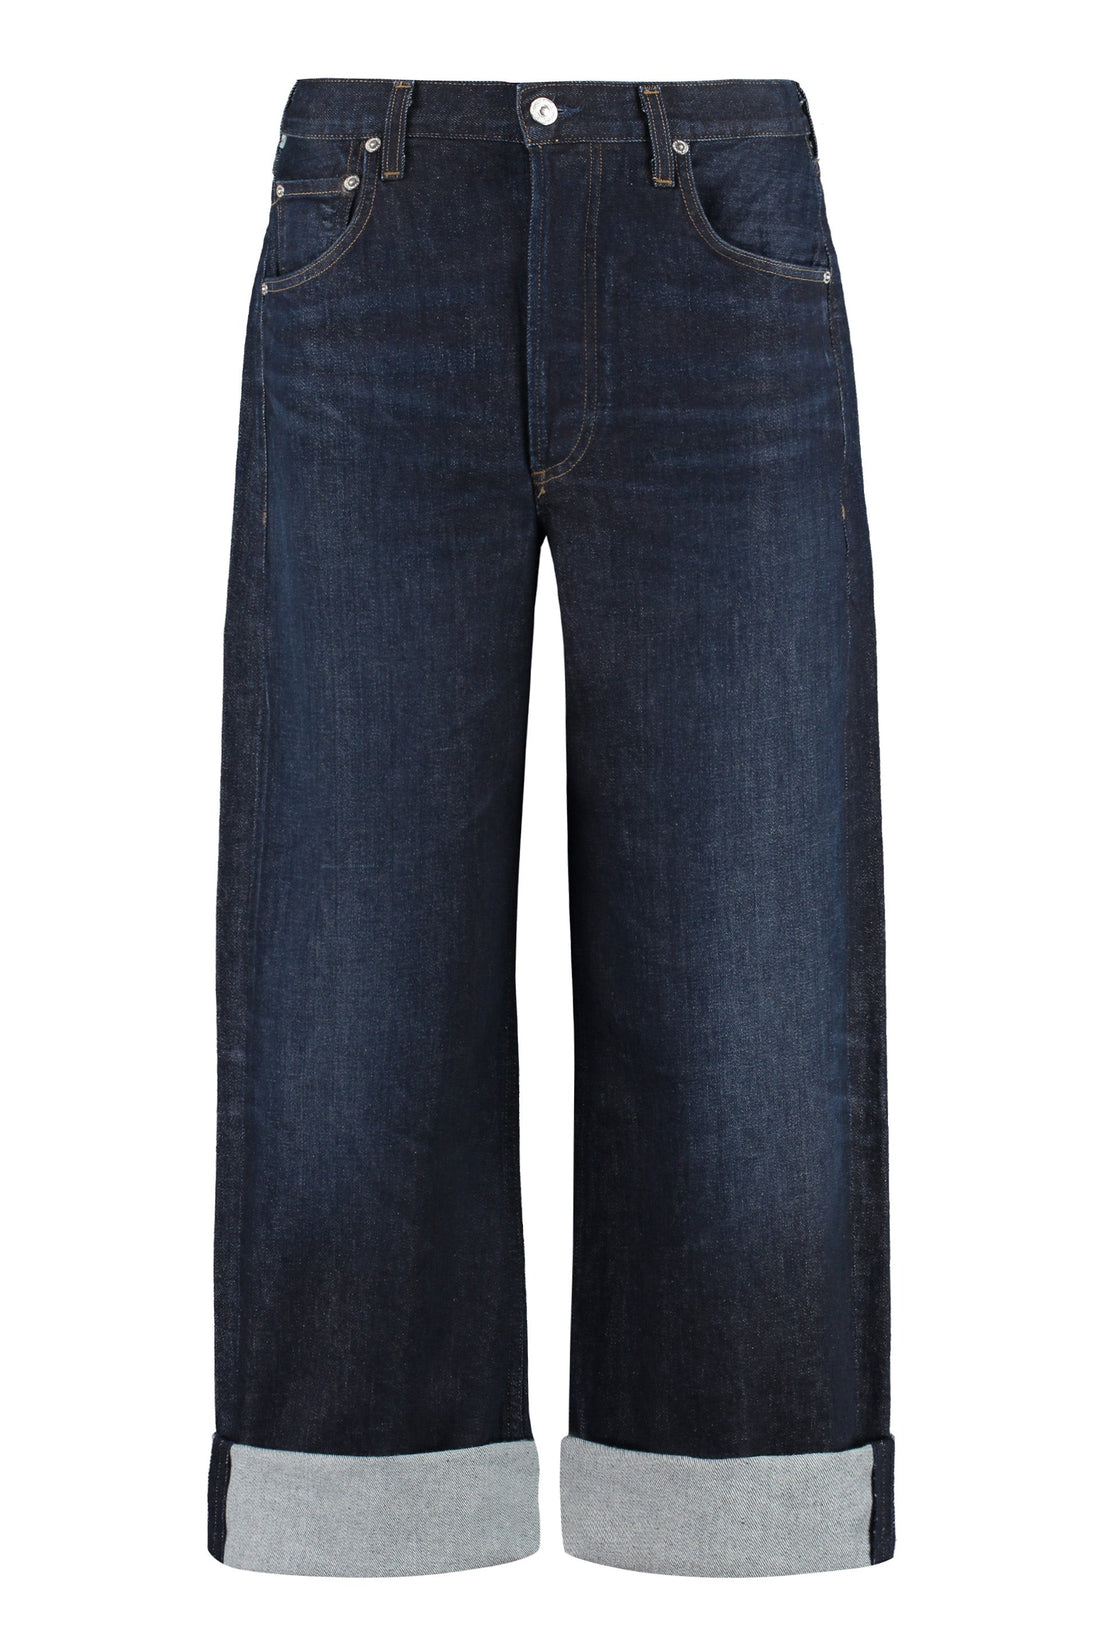 Citizens of Humanity-OUTLET-SALE-Ayla cropped jeans-ARCHIVIST